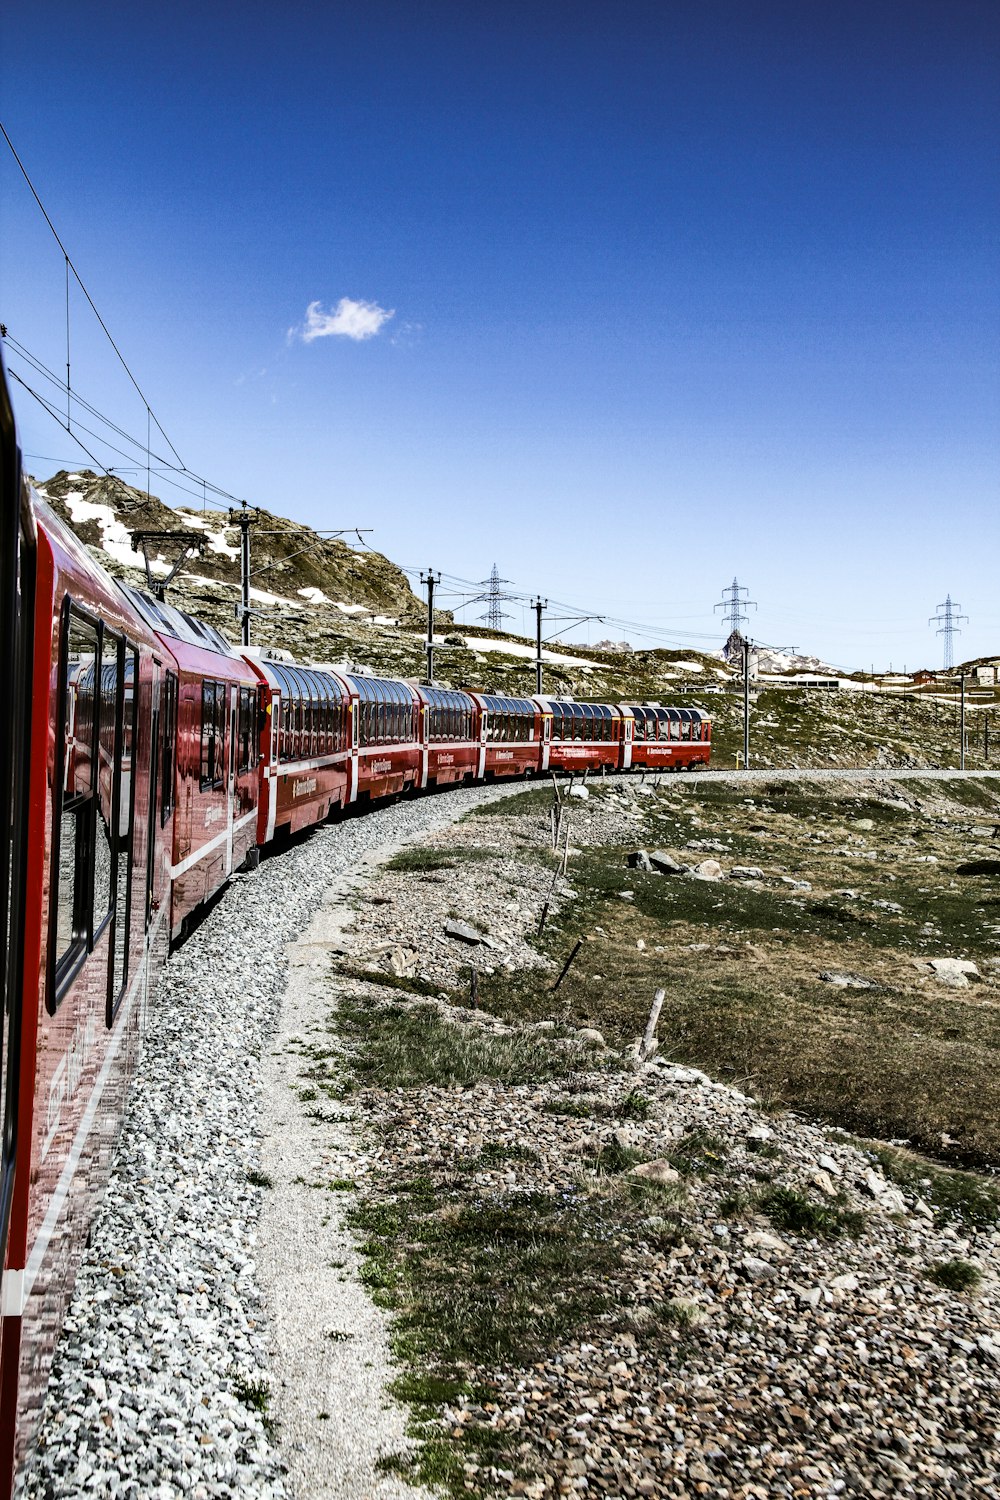 red and white train on rail tracks under blue sky during daytime